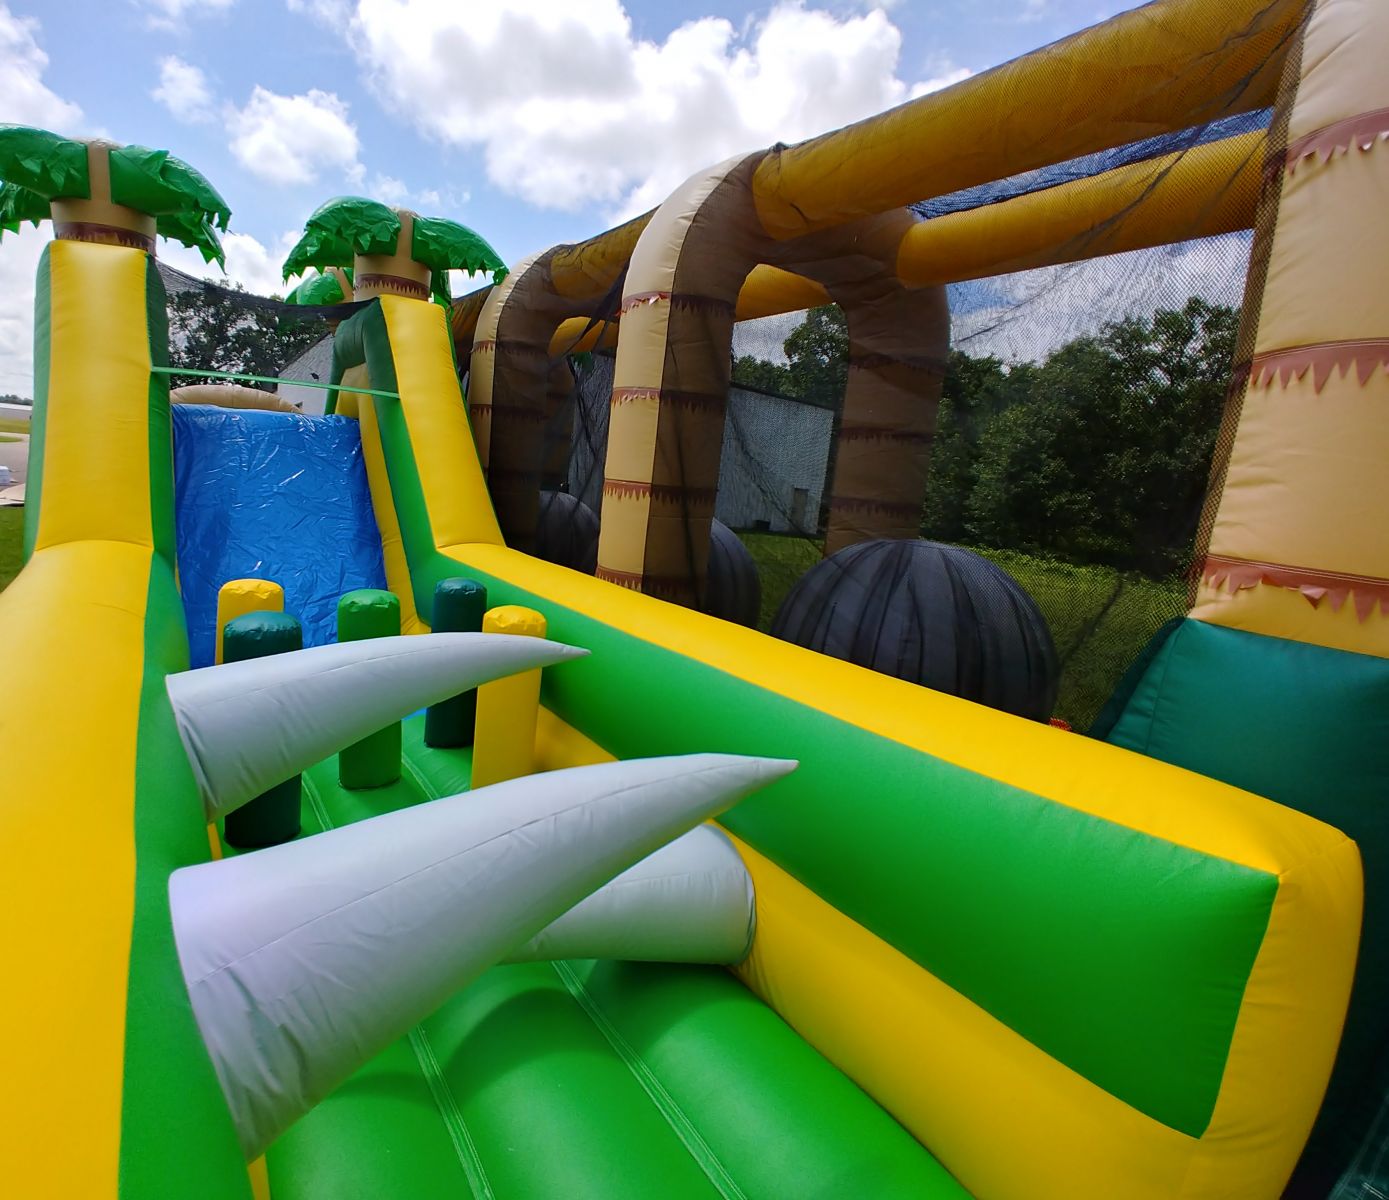 Obstacle course slide and inflatable challenges